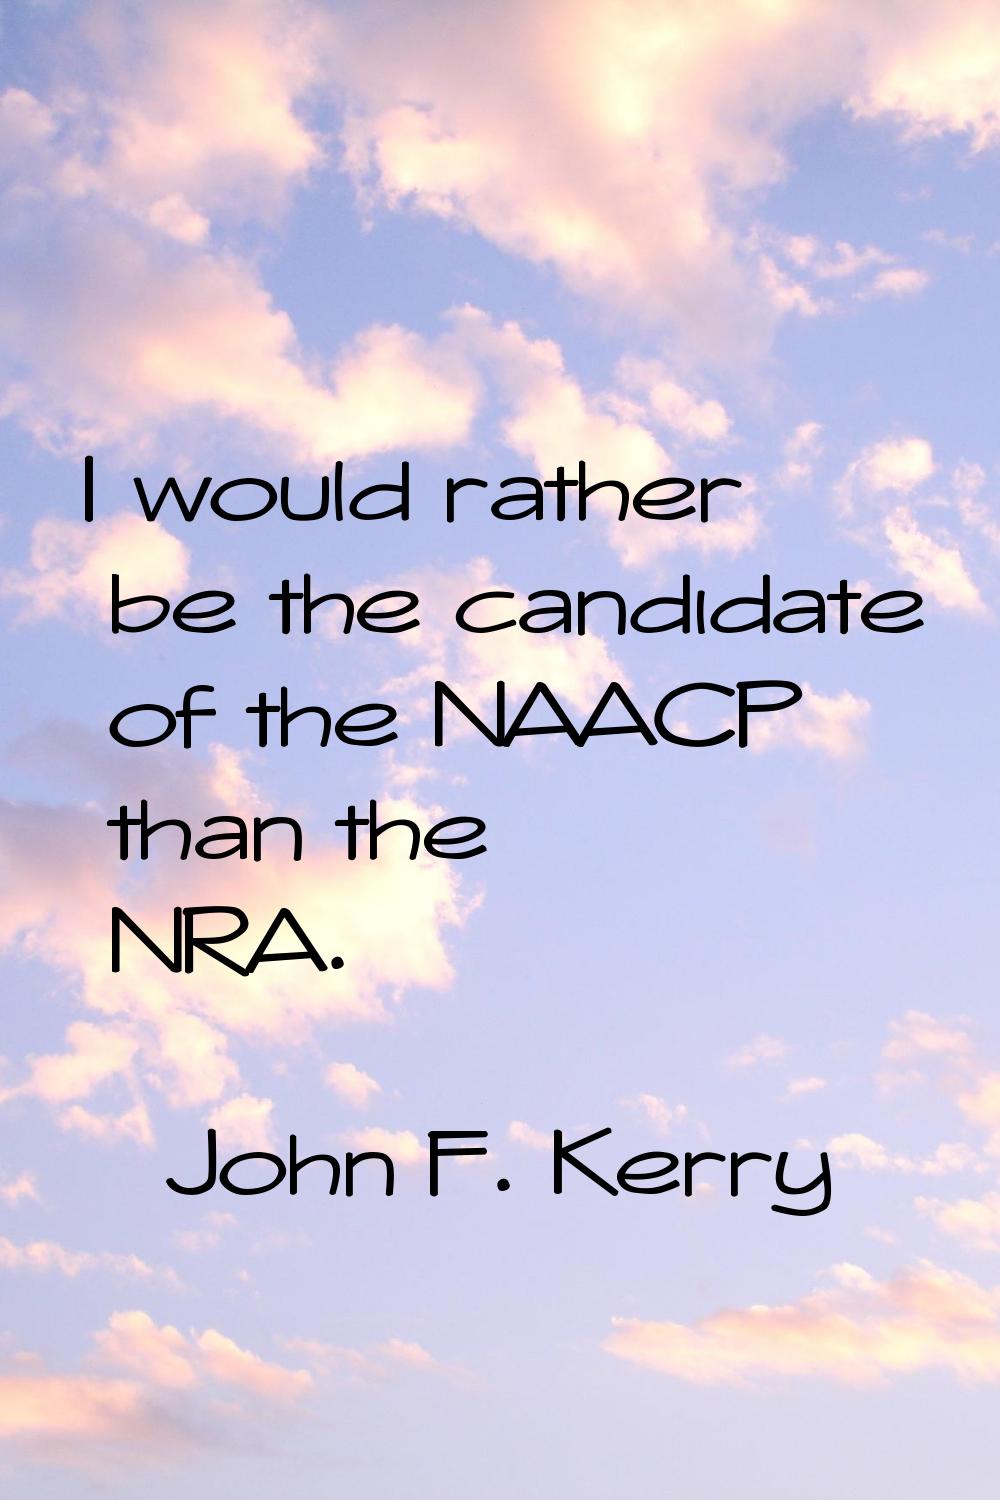 I would rather be the candidate of the NAACP than the NRA.